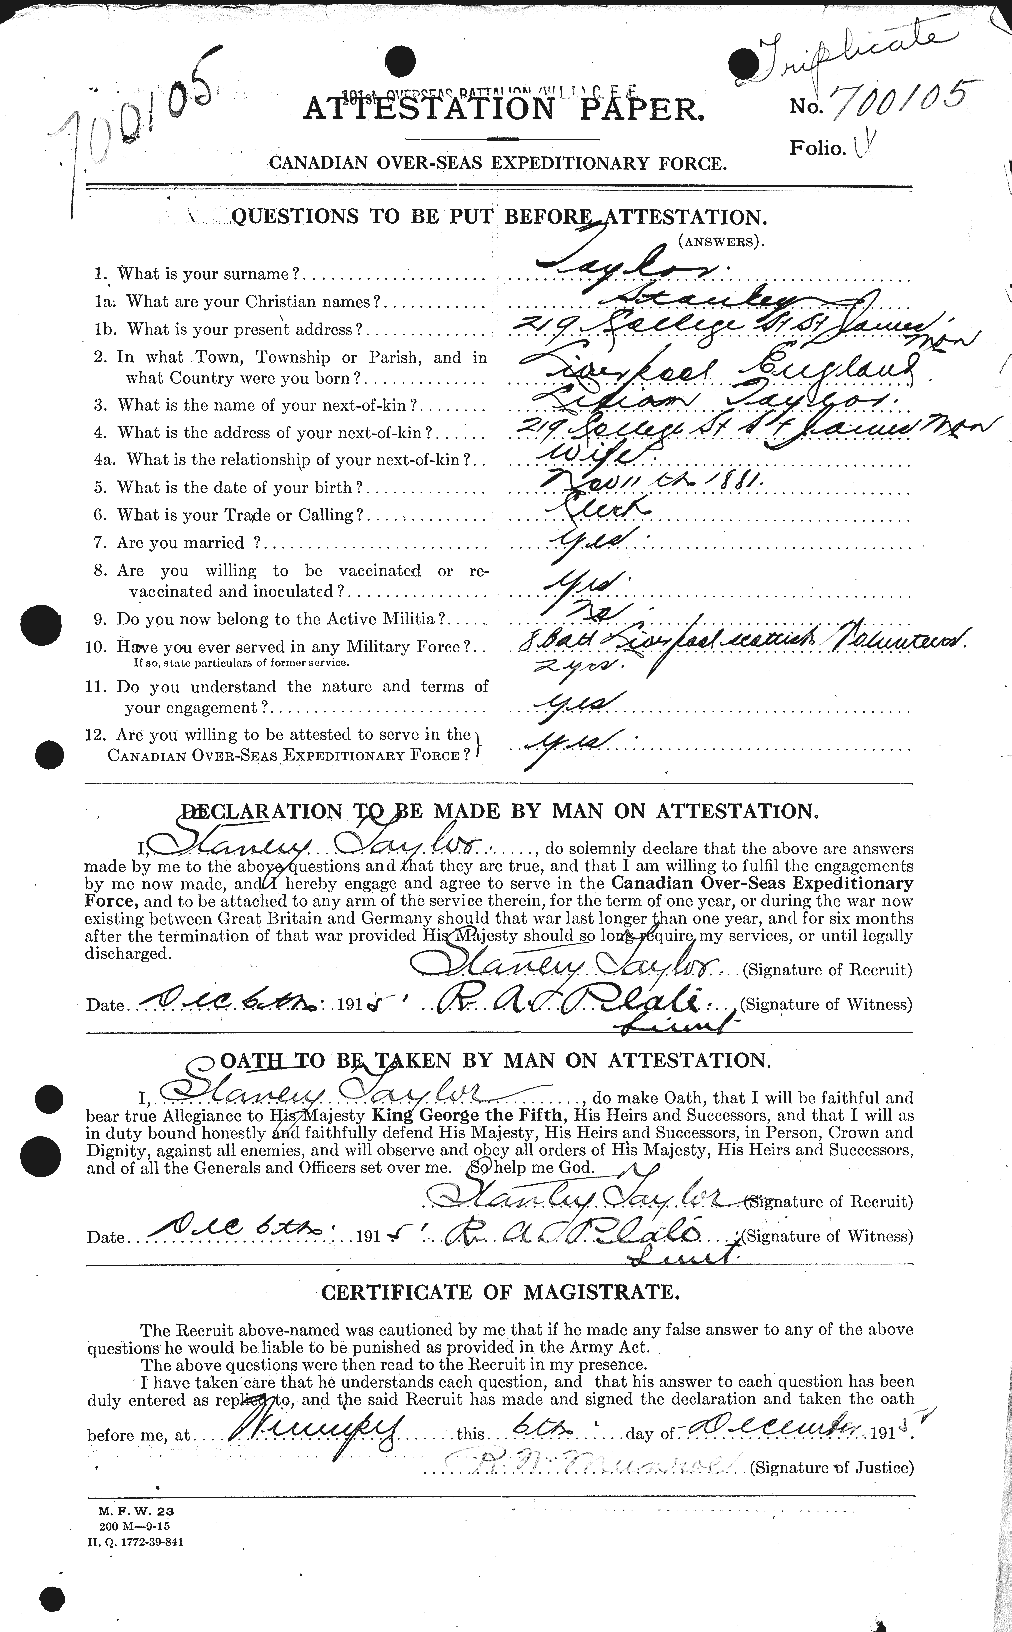 Personnel Records of the First World War - CEF 627910a